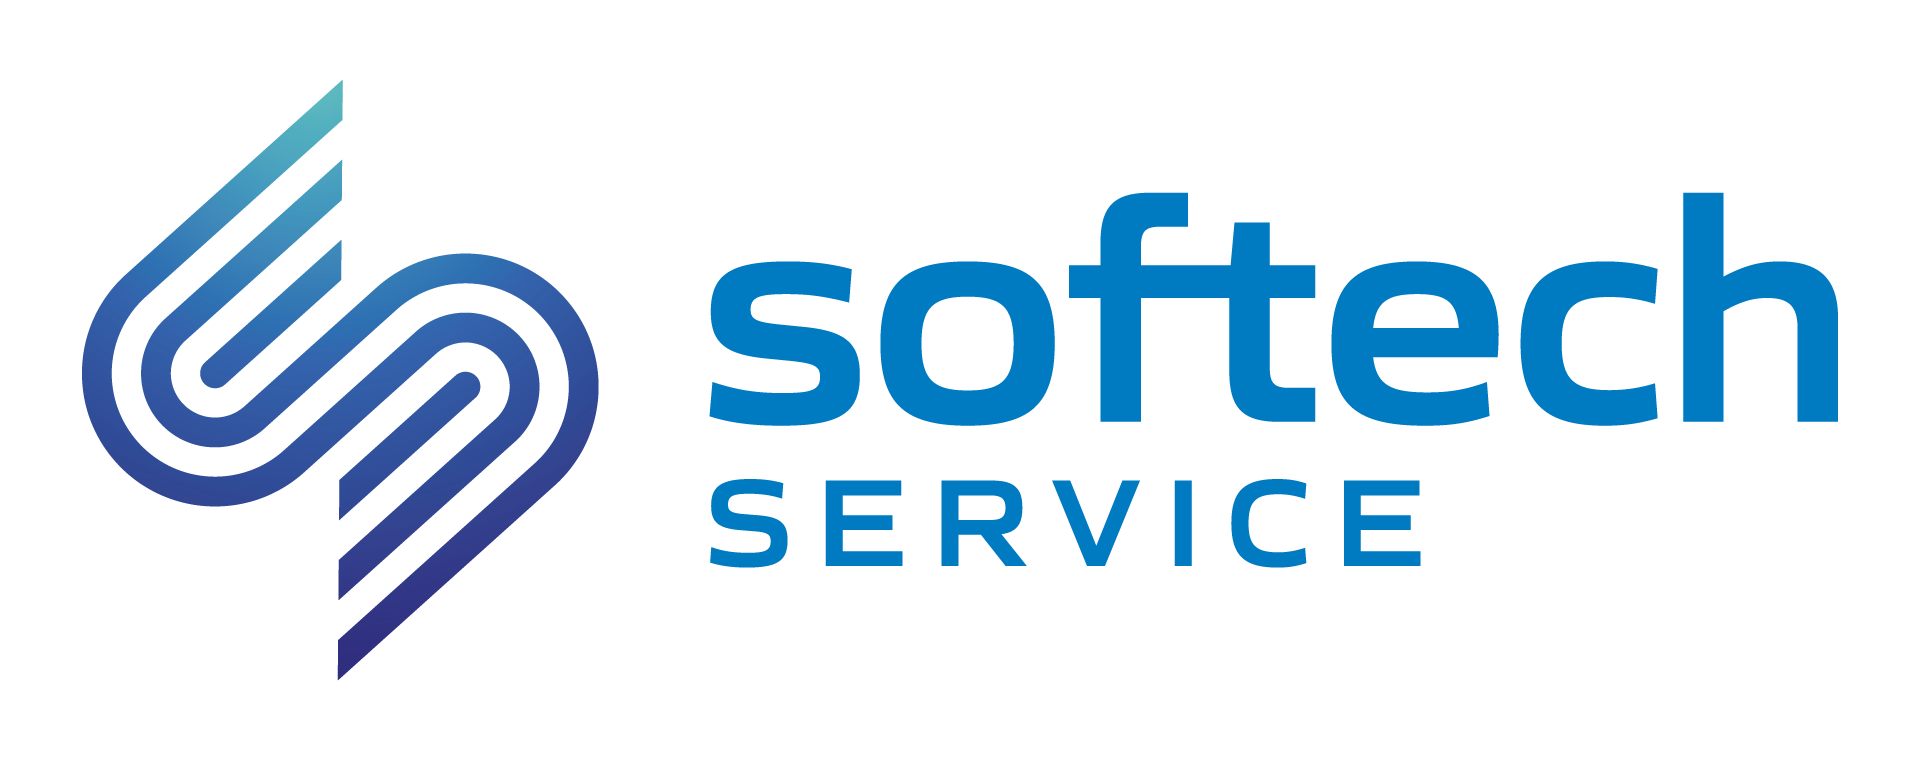 Analysis of Security - Softech Service